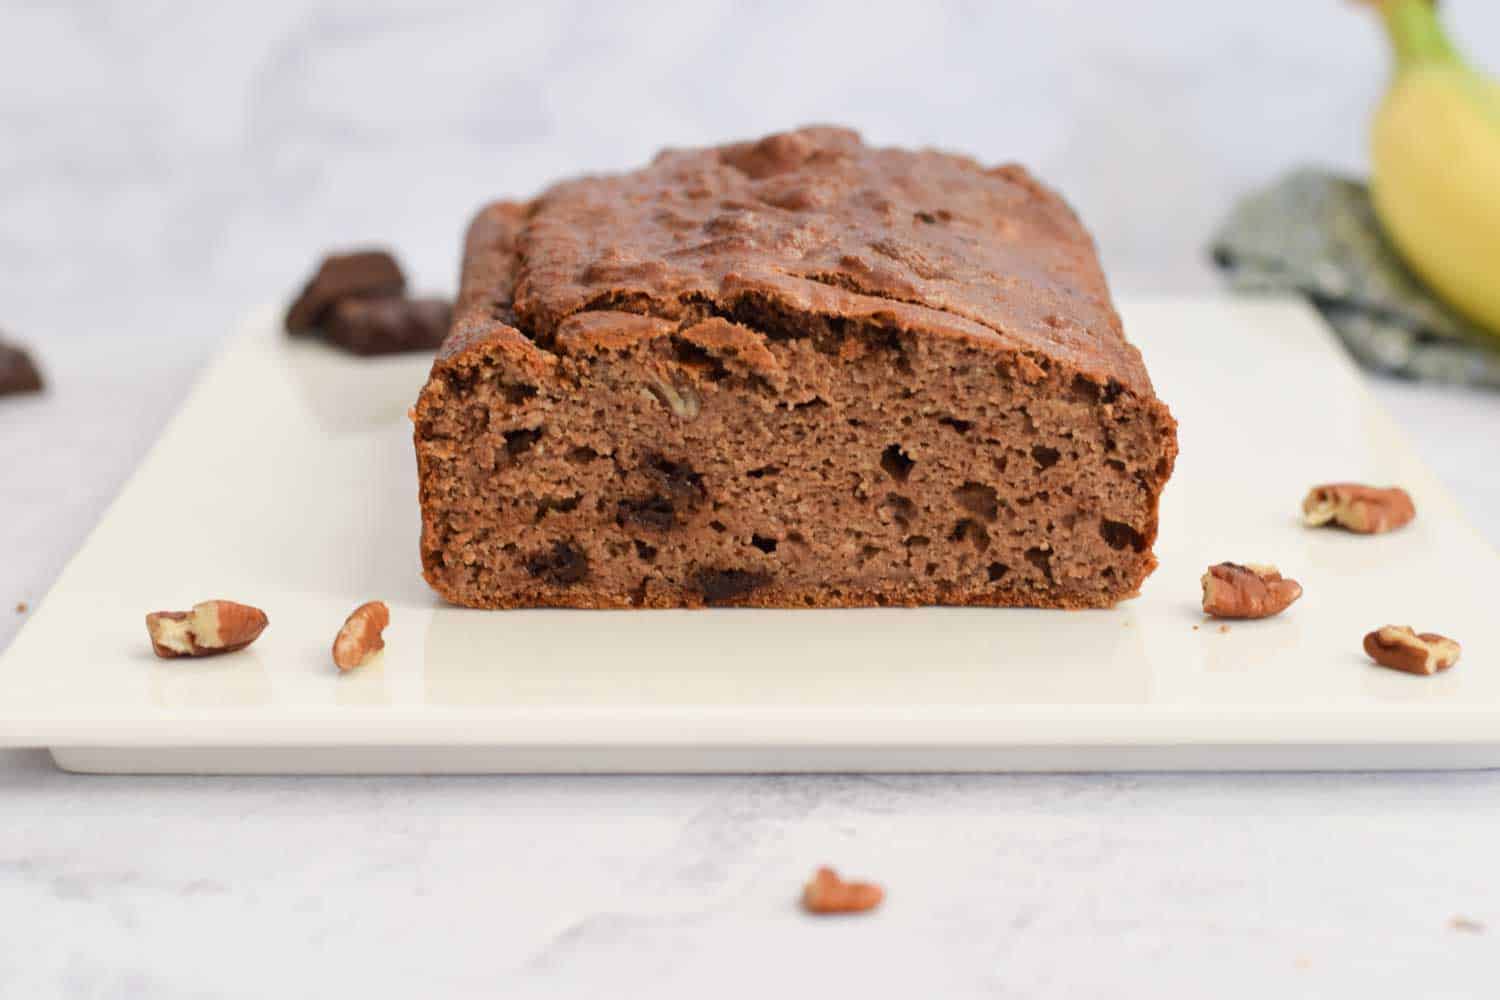 A chocolate coffee banana bread photographed from the side